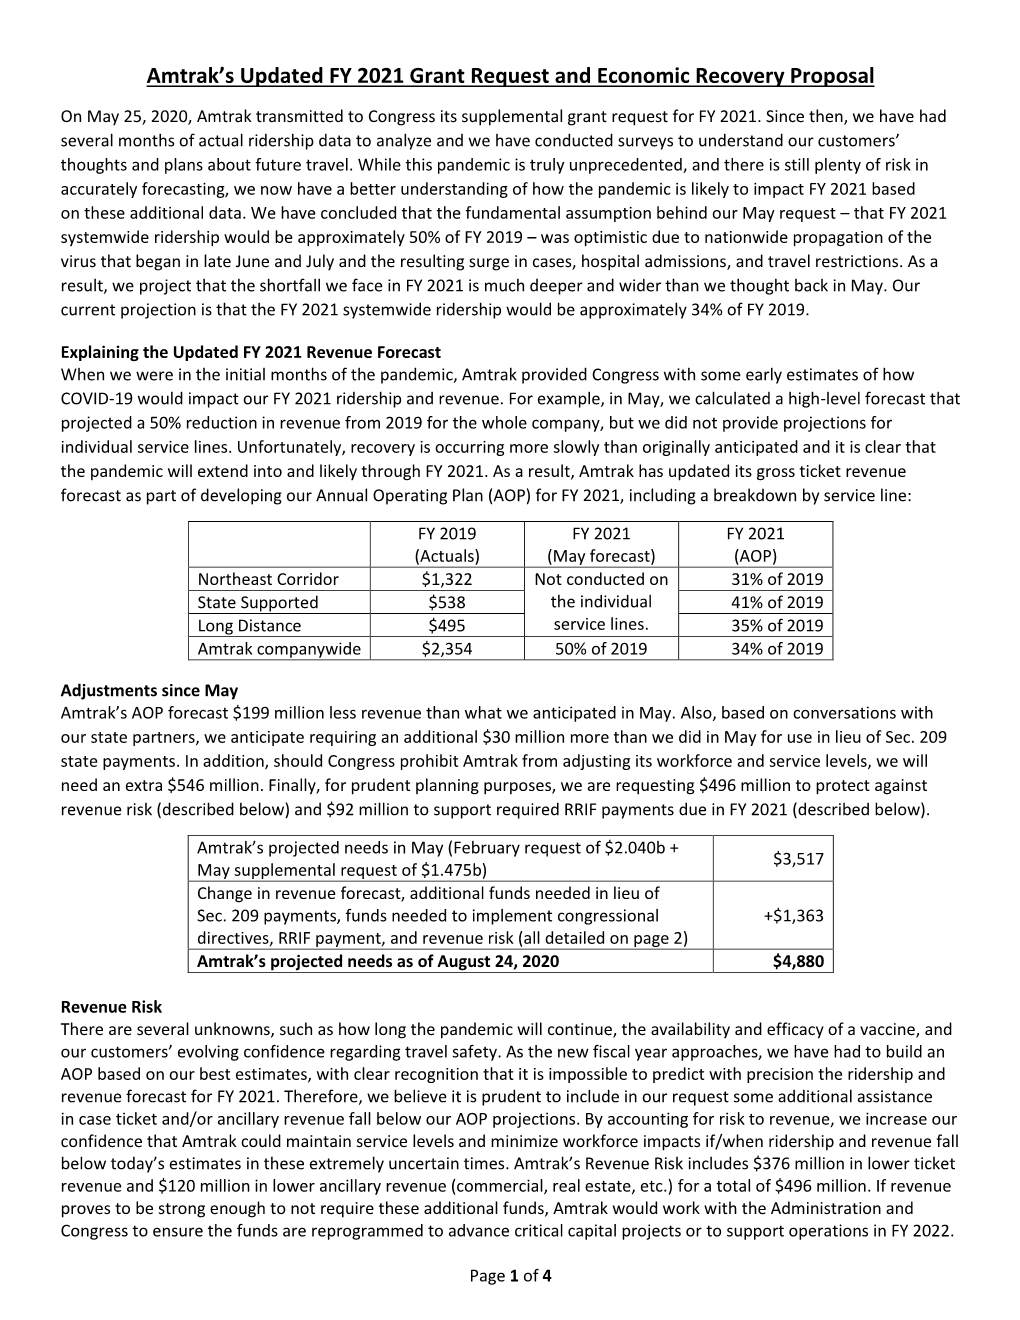 Amtrak's Updated FY 2021 Grant Request and Economic Recovery